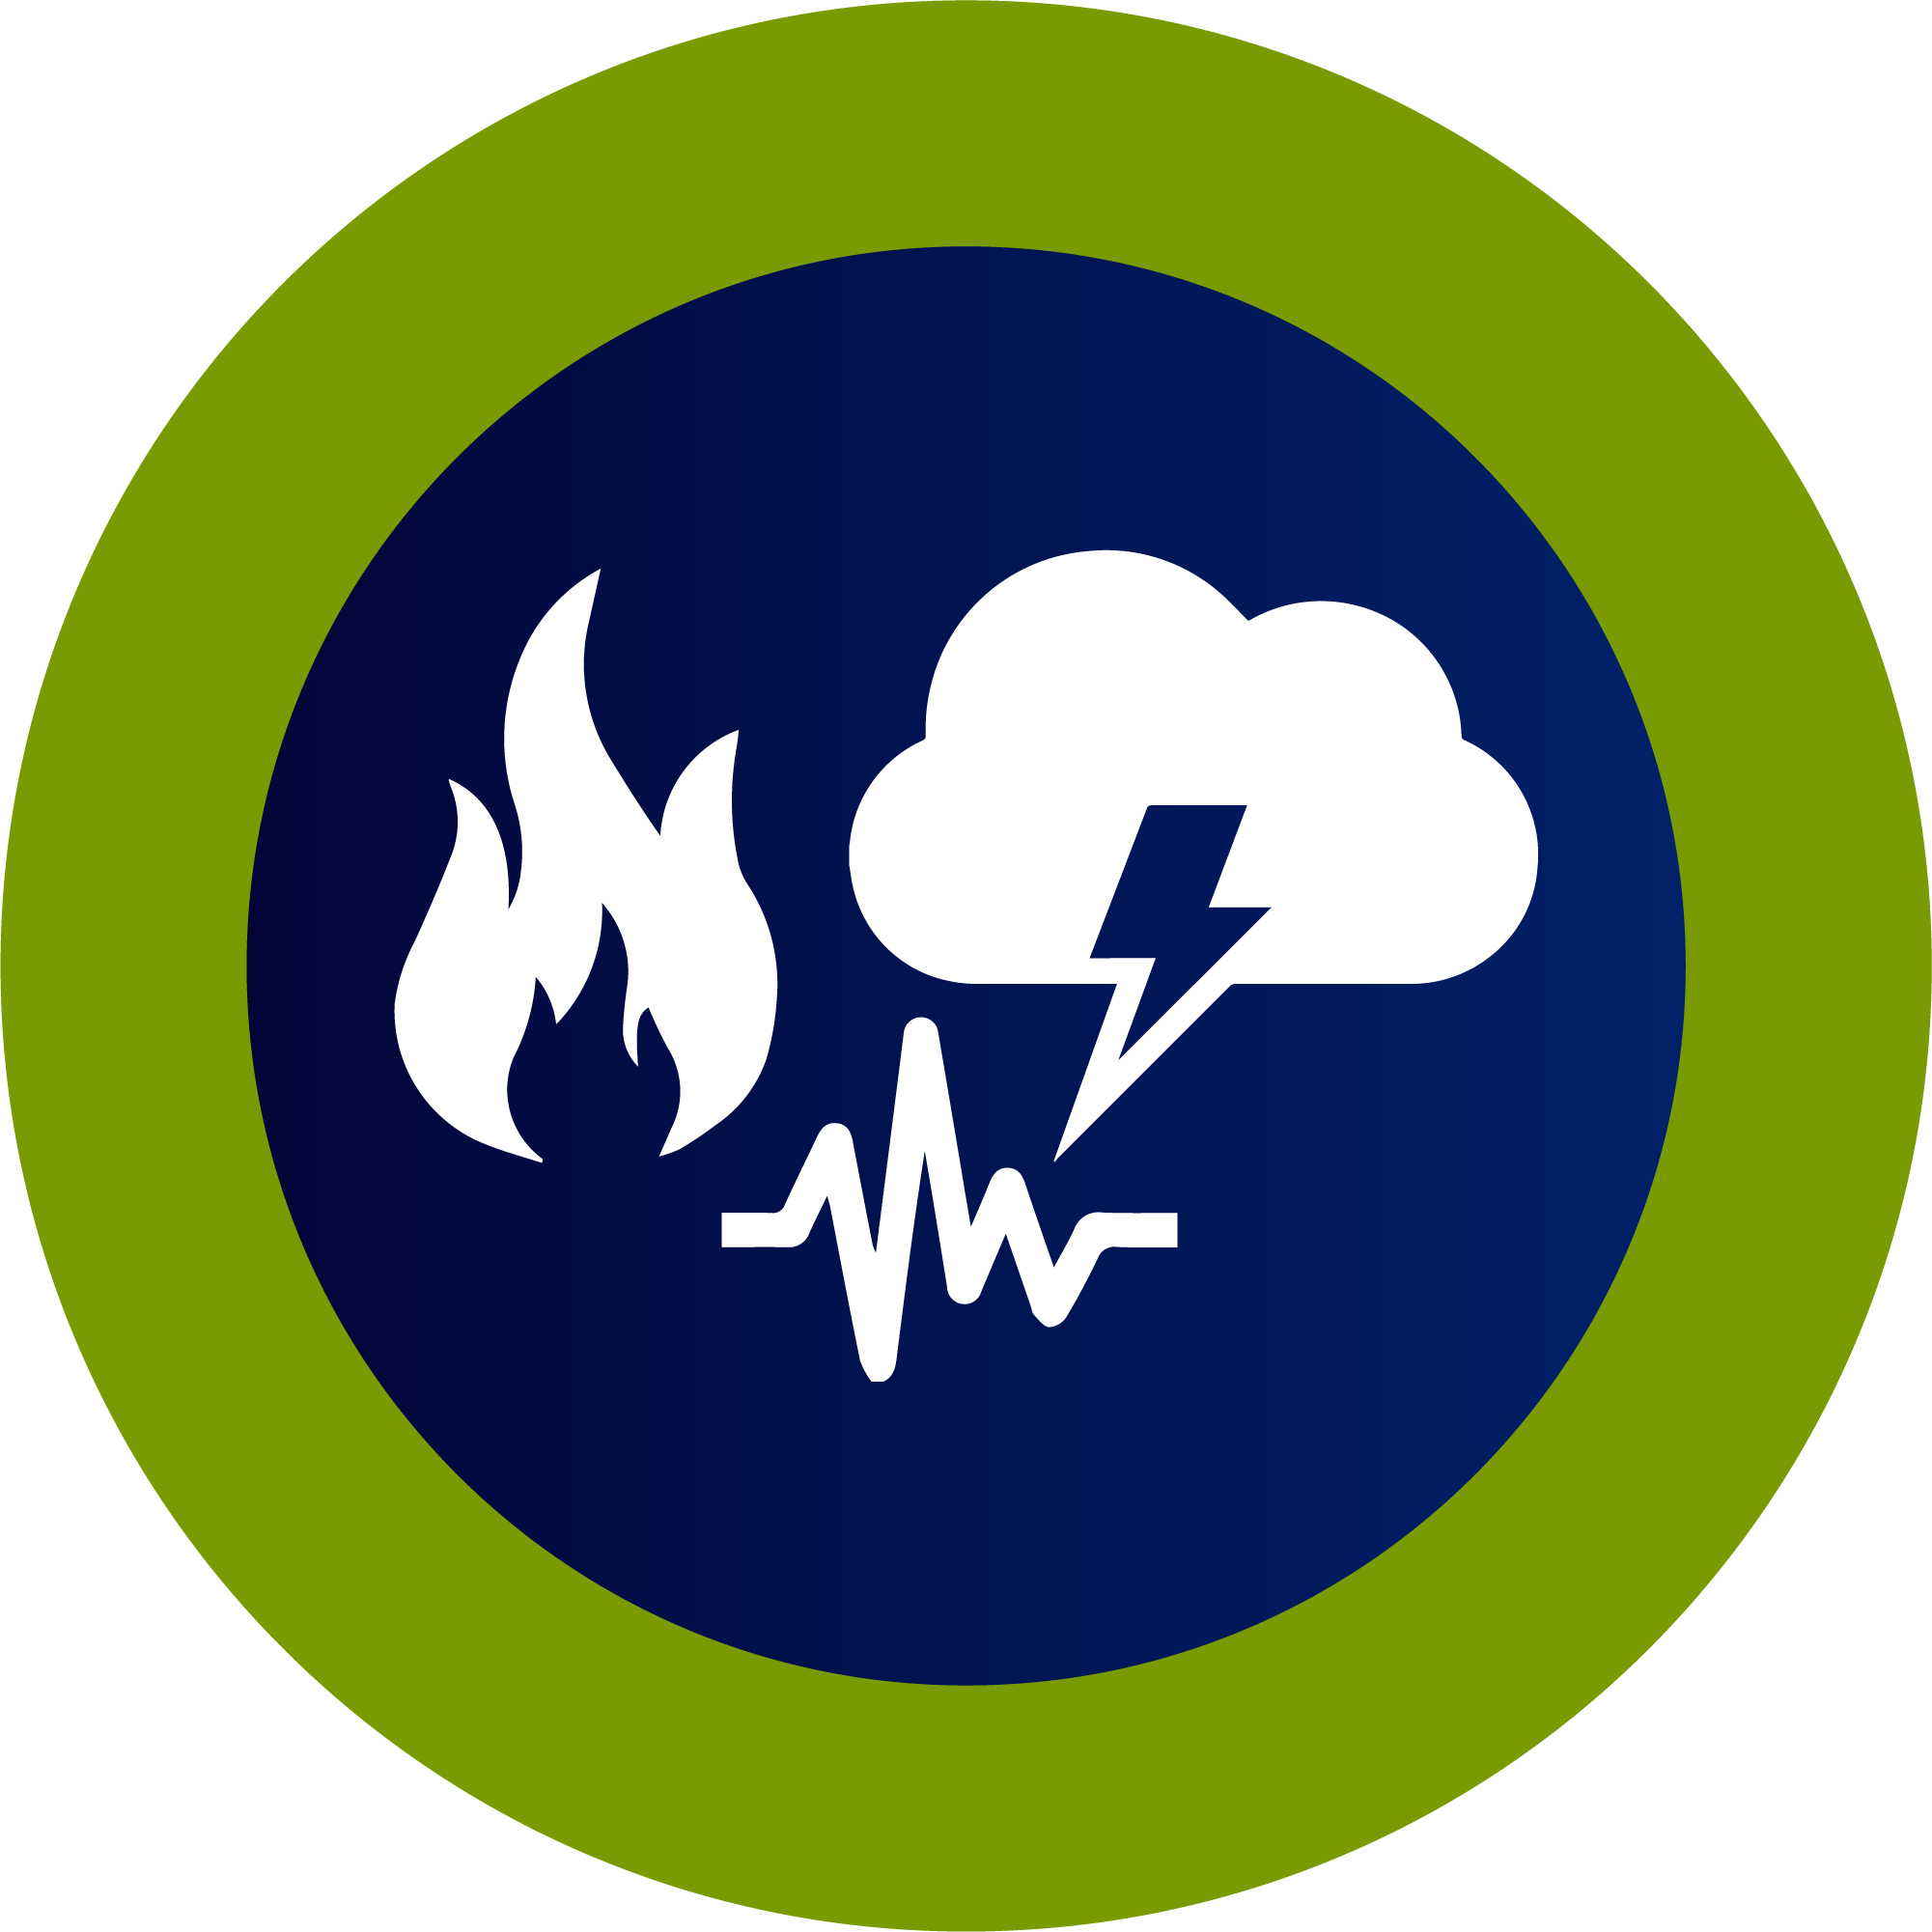 fire, cloud with lighting, and sound waves signs